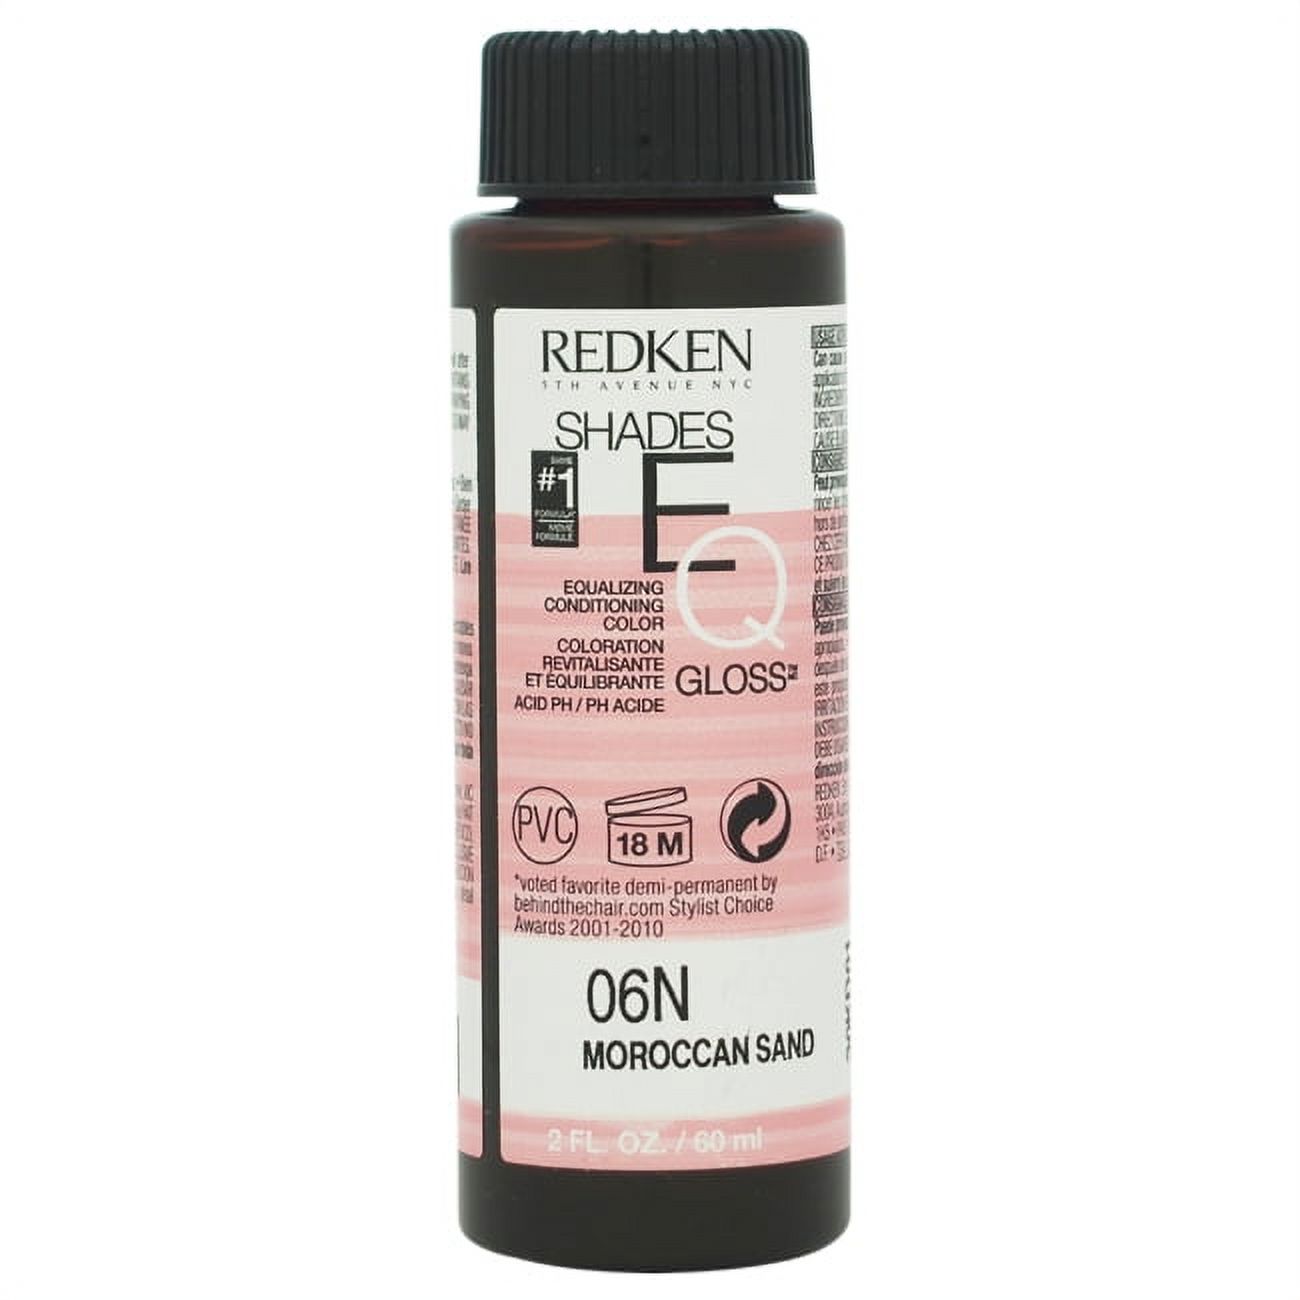 Redken Shades EQ Hair Color Gloss, 06N, Moroccan Sand, 2 fl oz - image 1 of 8